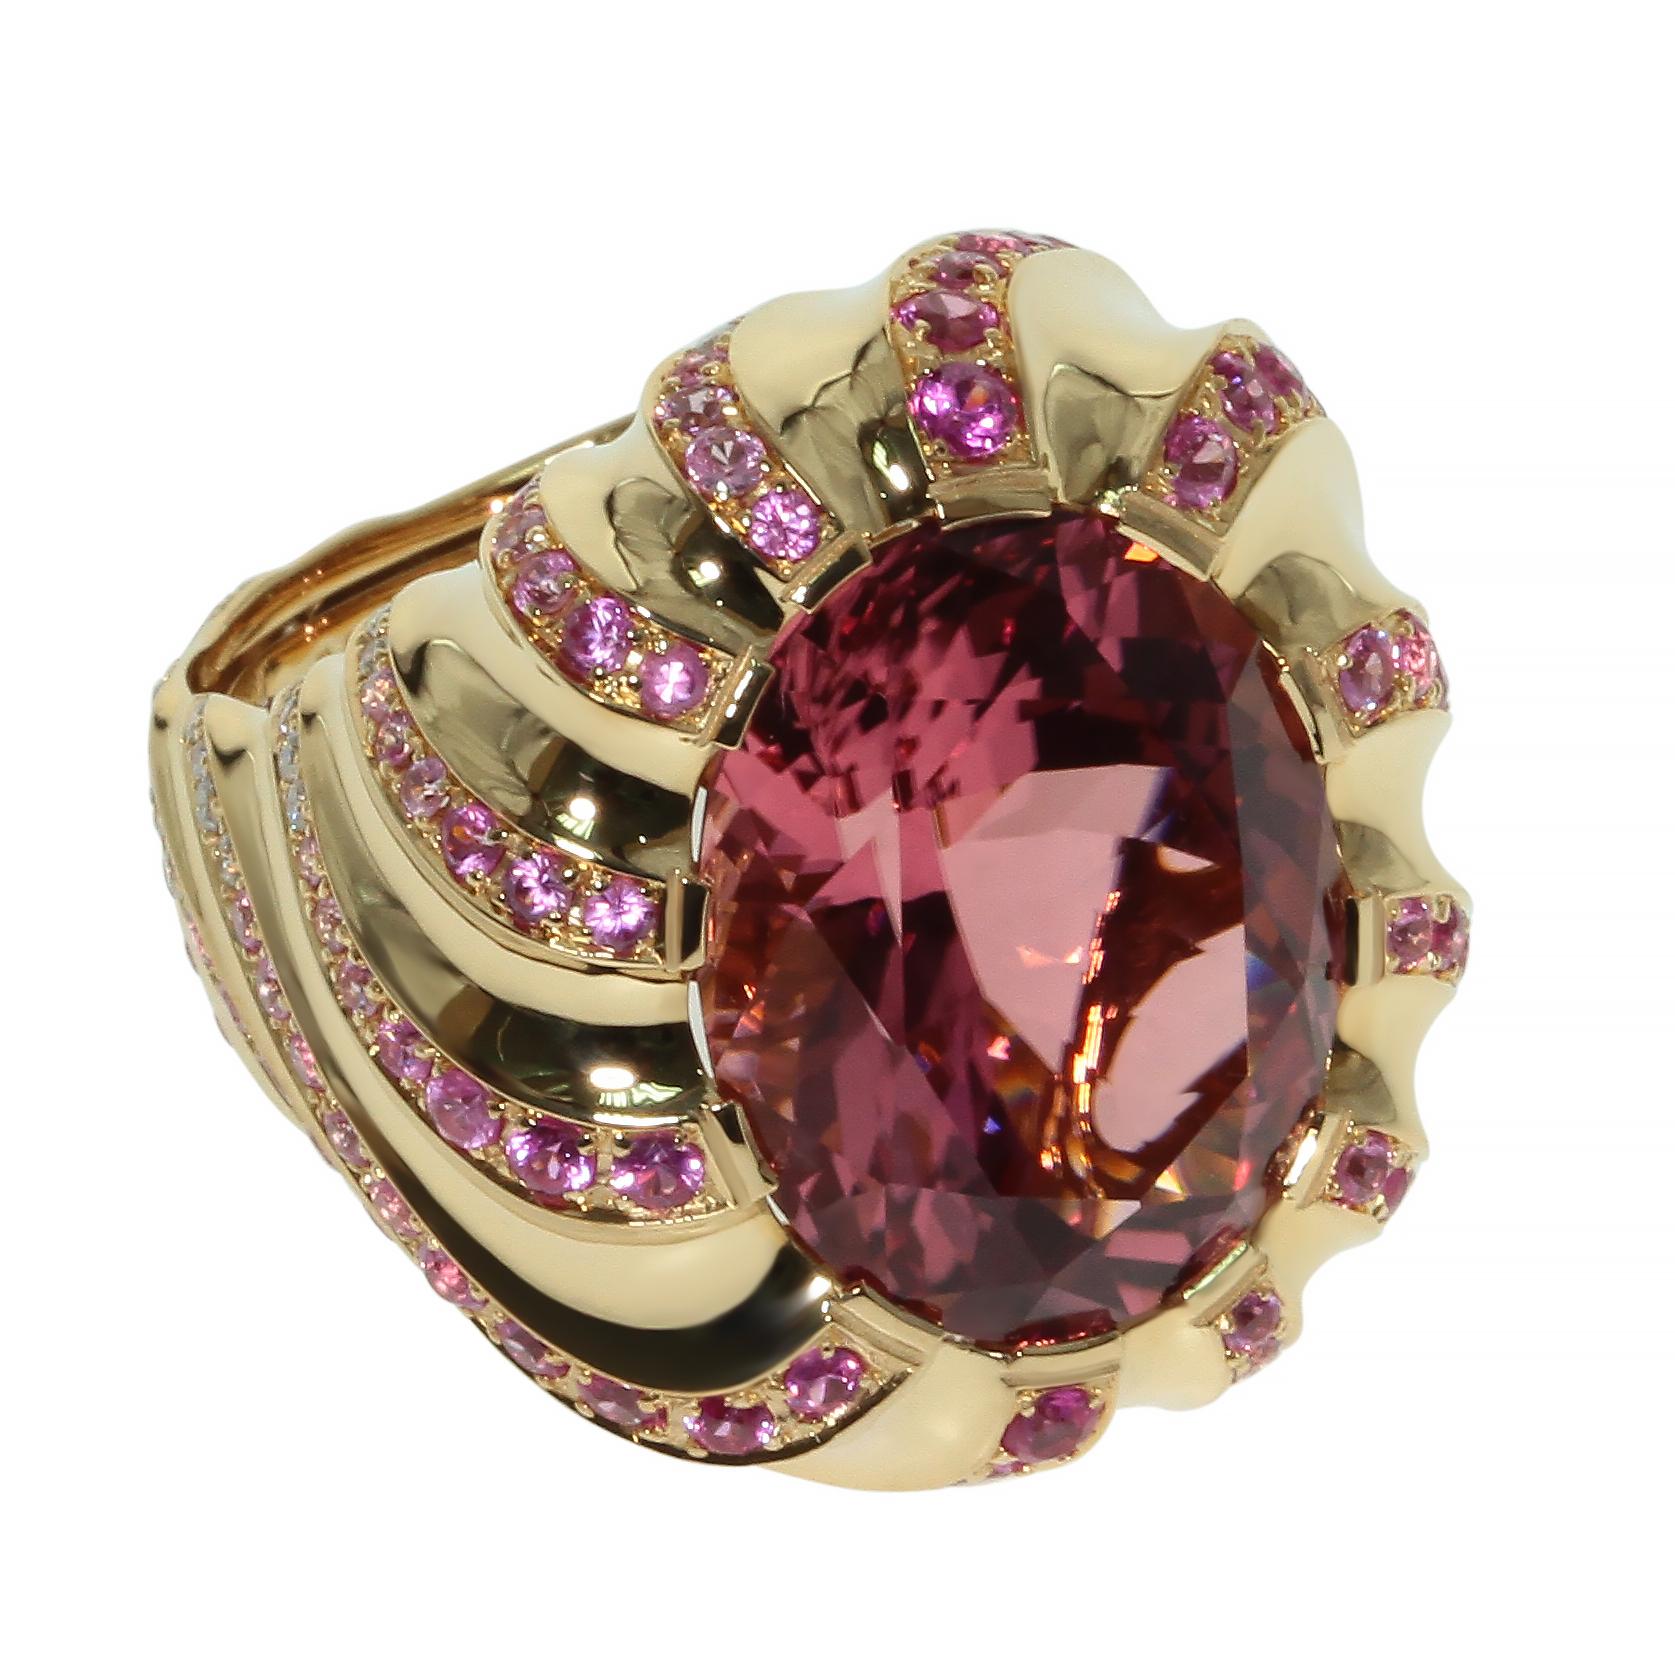 11.96 carat Top Pink Brazilian Tourmaline Diamond Pink Sapphire 18 Karat Yellow Gold Ring

100 percent clean, Hot Pink Color Tourmaline supported be the graduated waves in this ring.
Changes of colors from Pink to white looks just perfect.

Please